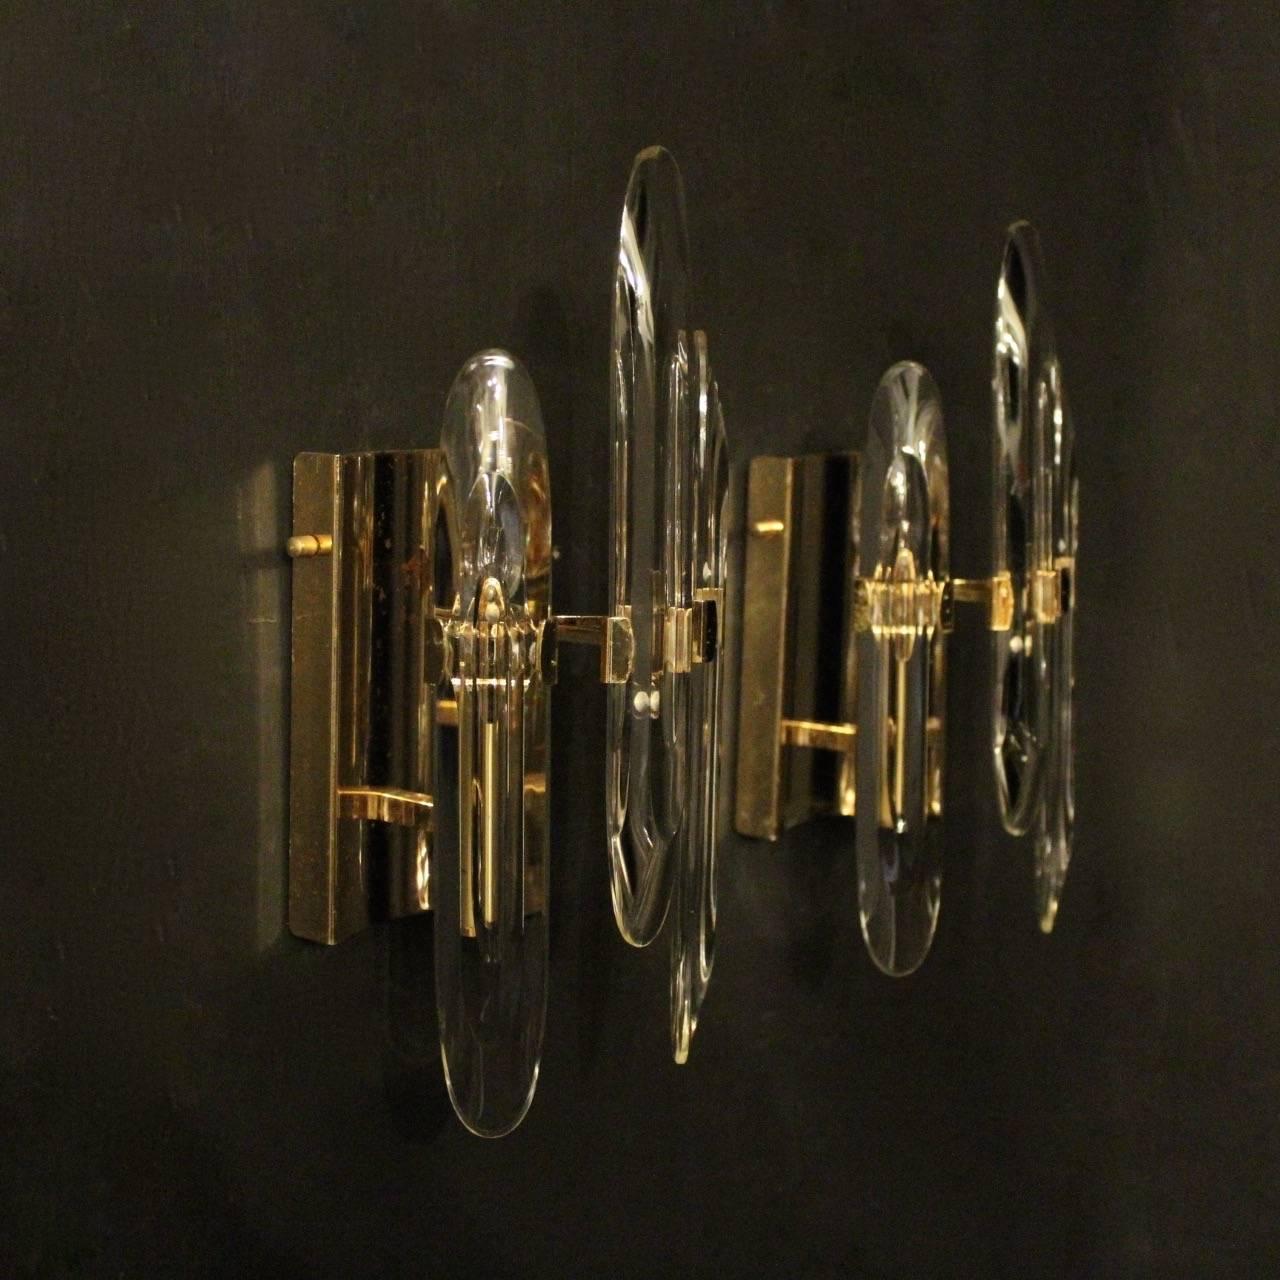 An Italian pair of gold plated brass single arm Gaetano Sciolari lights, the three elongated bevelled crystal rods set in front of a single light fitting, issuing from a rectangular backplate, nice original patination and good size, designed by